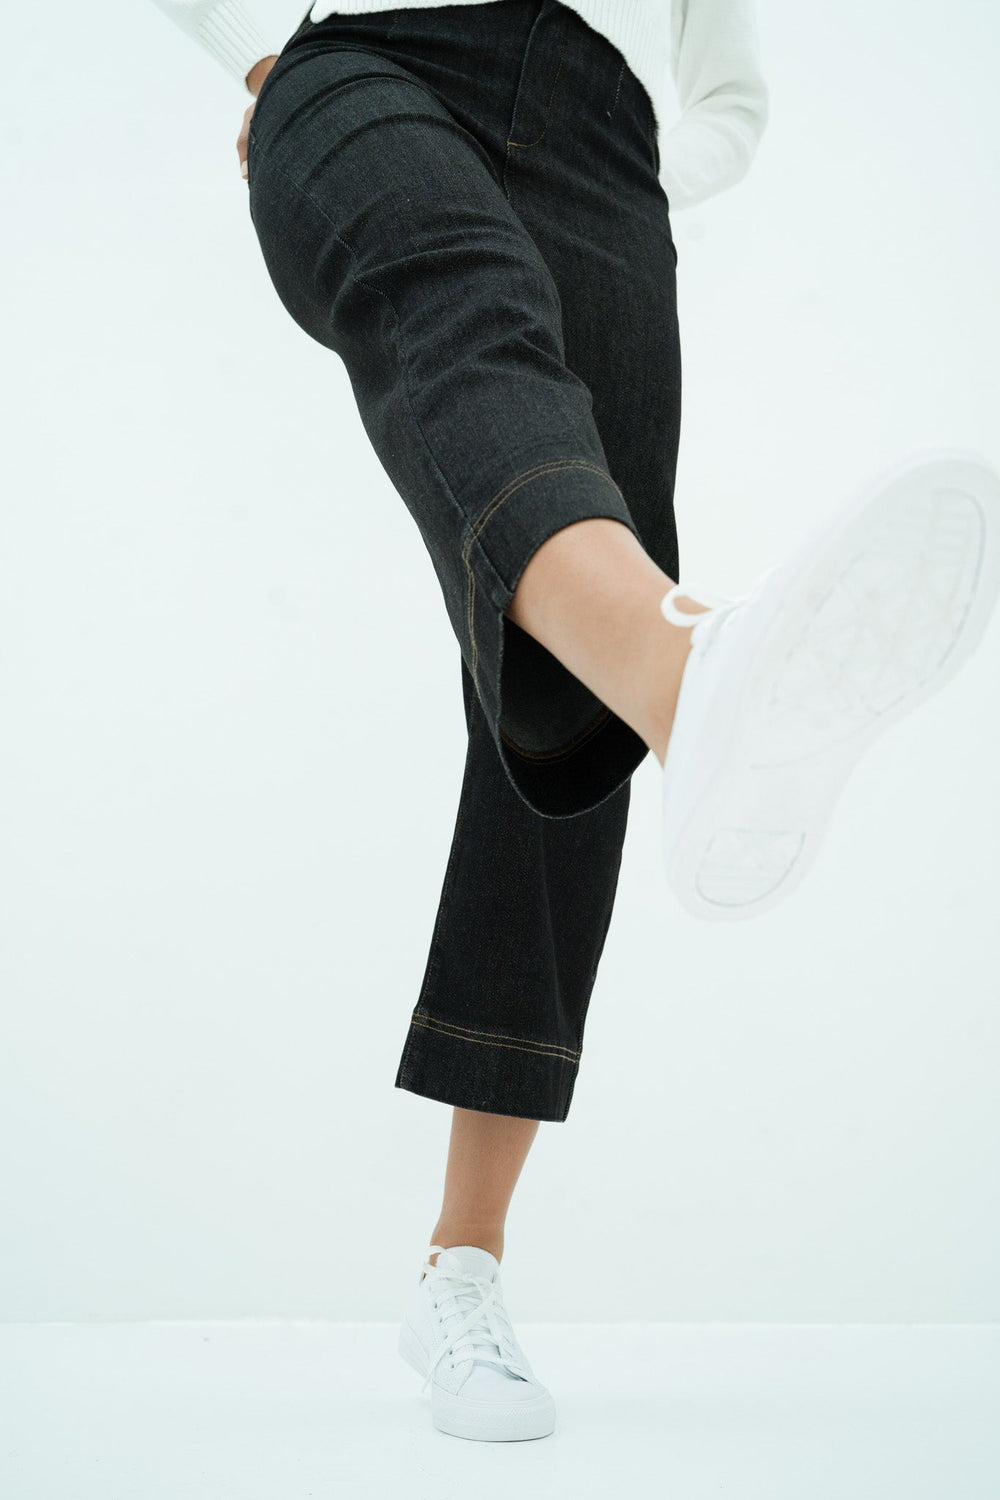 Humidity Lifestyle Fleetwood Jean in black - Since I Found You